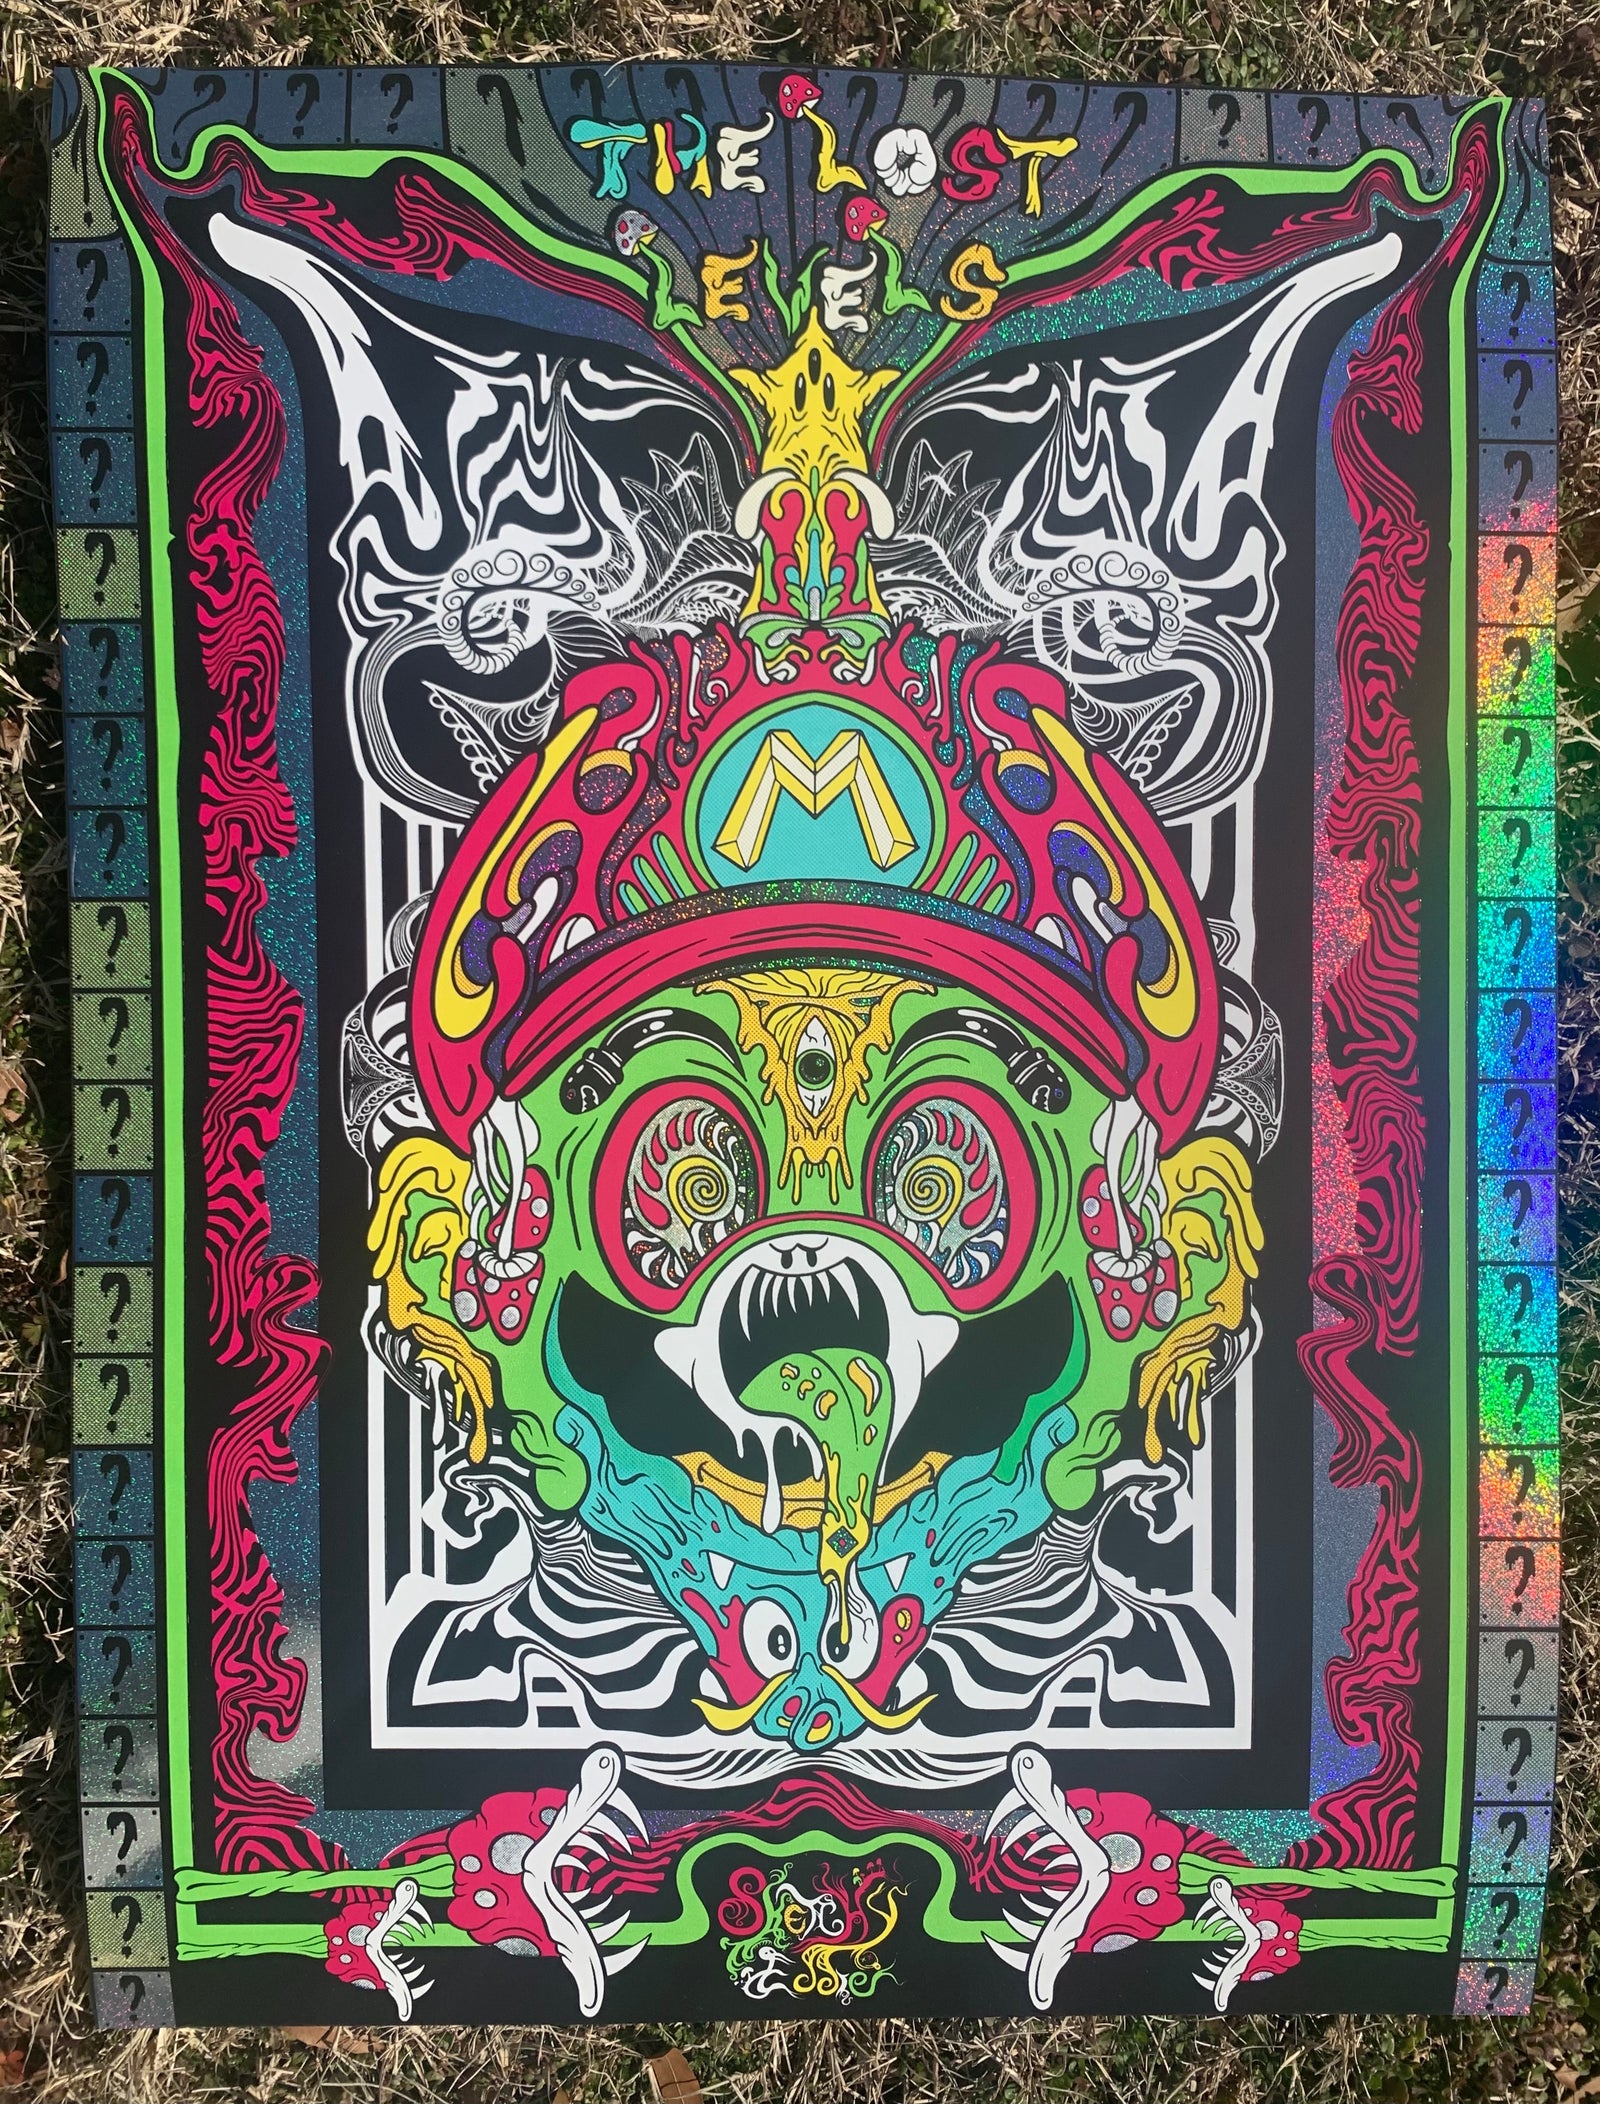 "The Lost Levels" Limited Edition Foil Poster Print